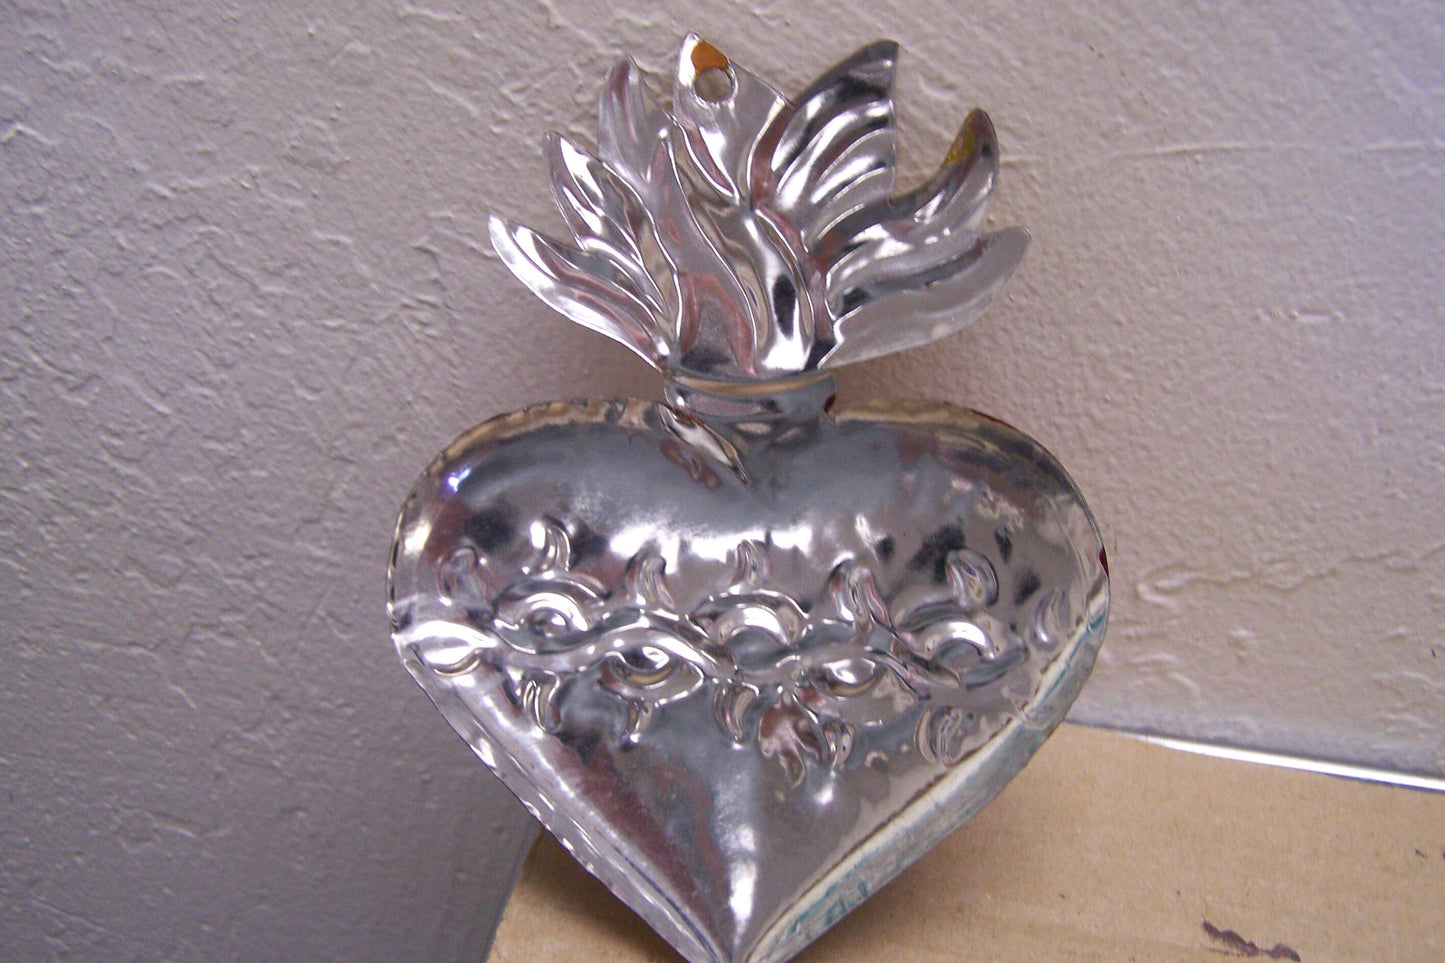 Painted Tin Sacred Heart Milagro Ex Voto - Flmed Heart with Thorns, Type II - Mexico